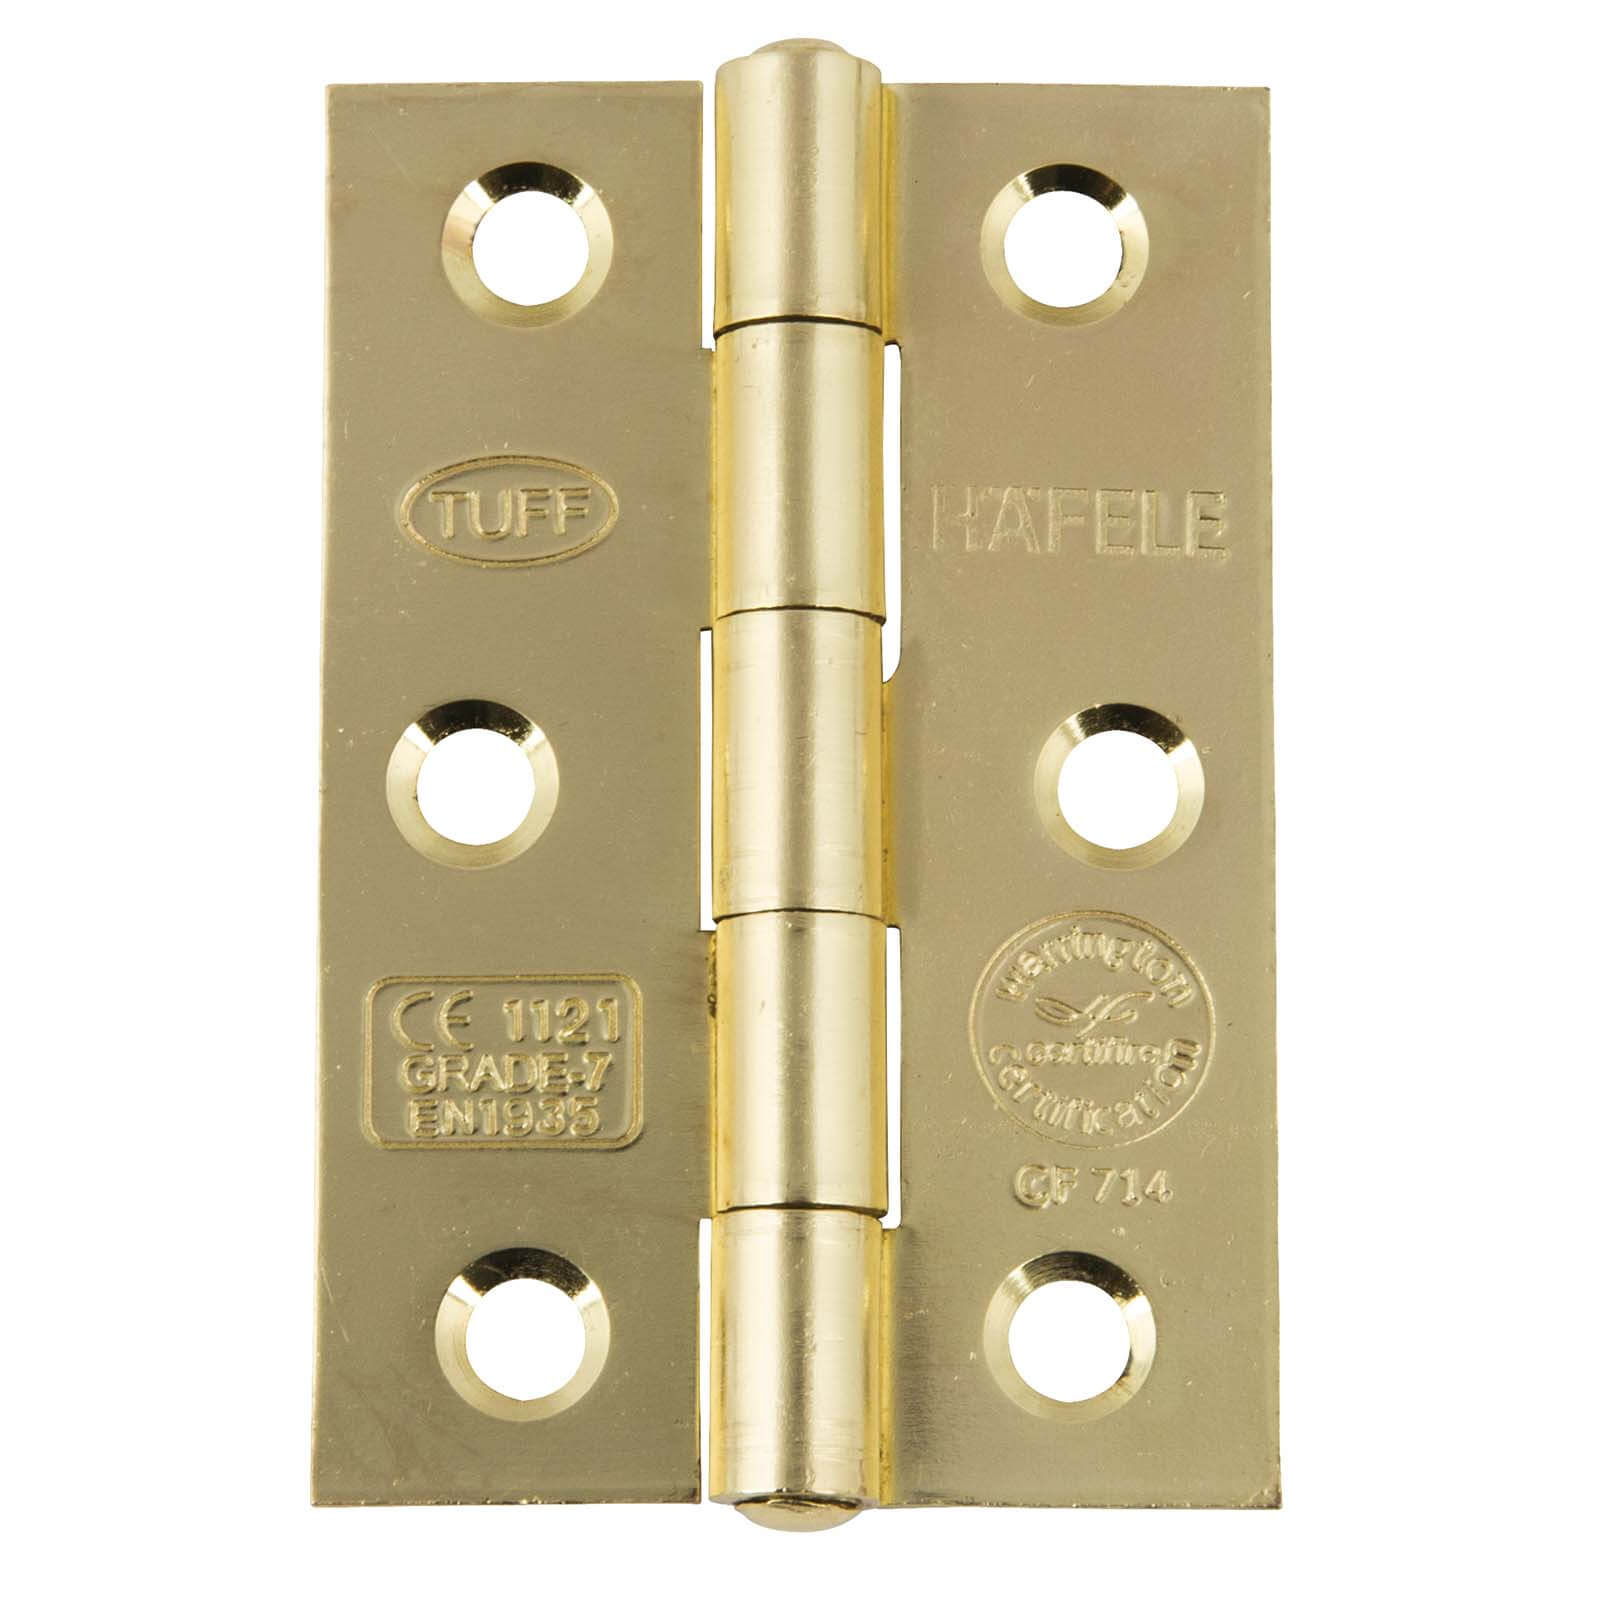 CE7 Butt Hinge - Electro Brass - 75 x 49mm - 2 Pack